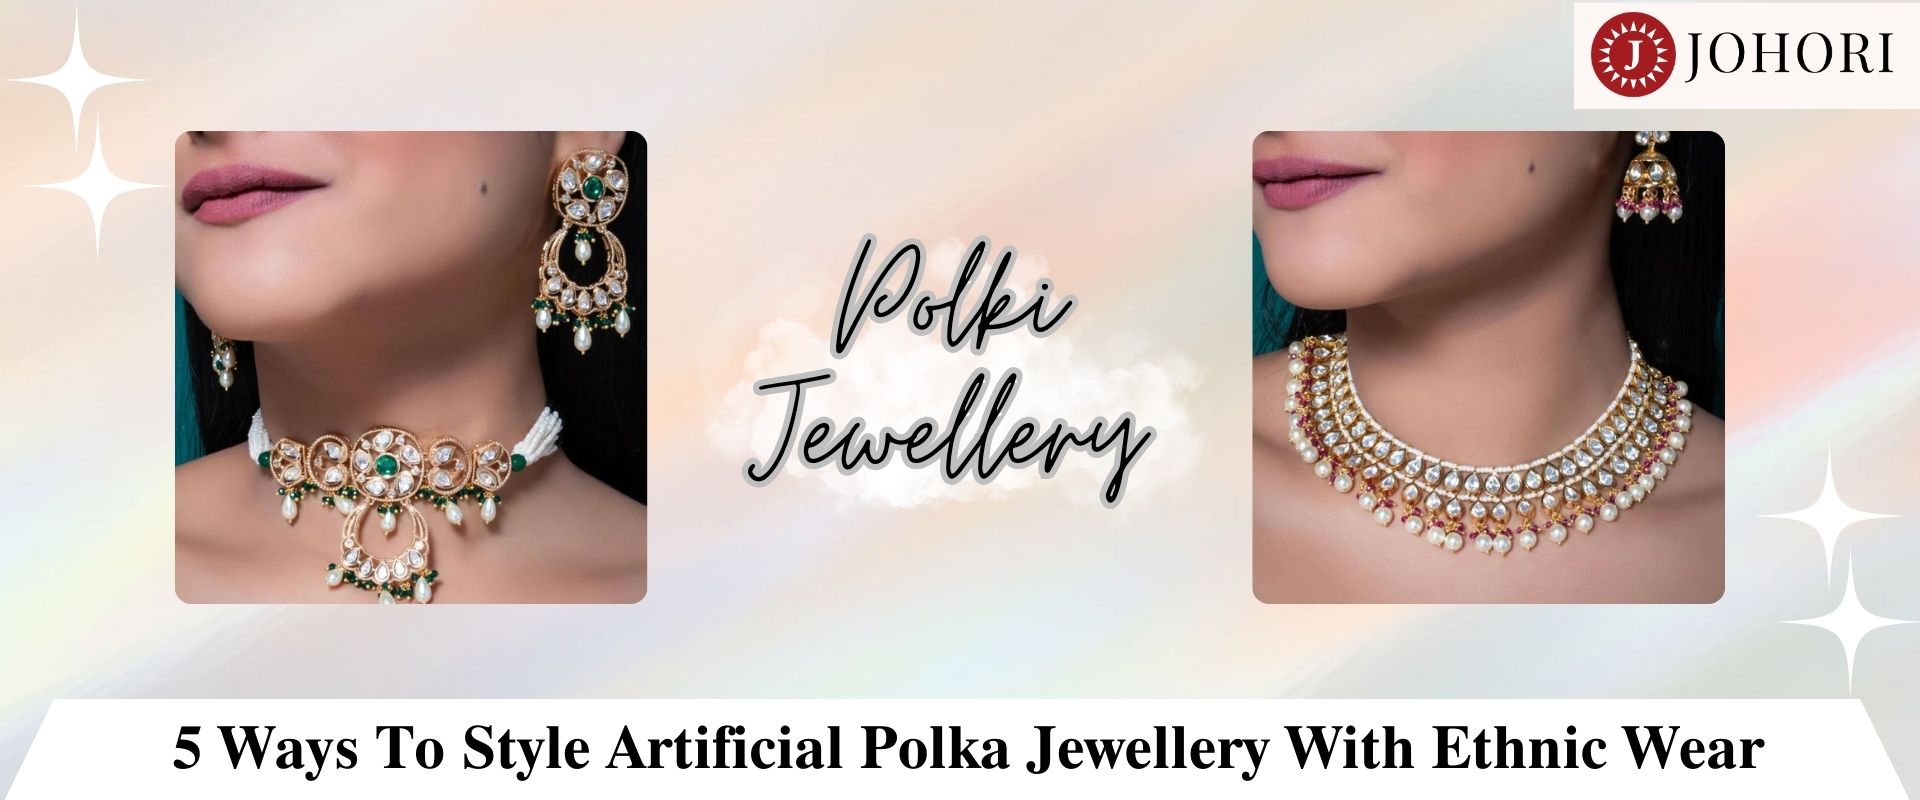 5 Ways To Style Artificial Polka Jewellery With Ethnic Wear